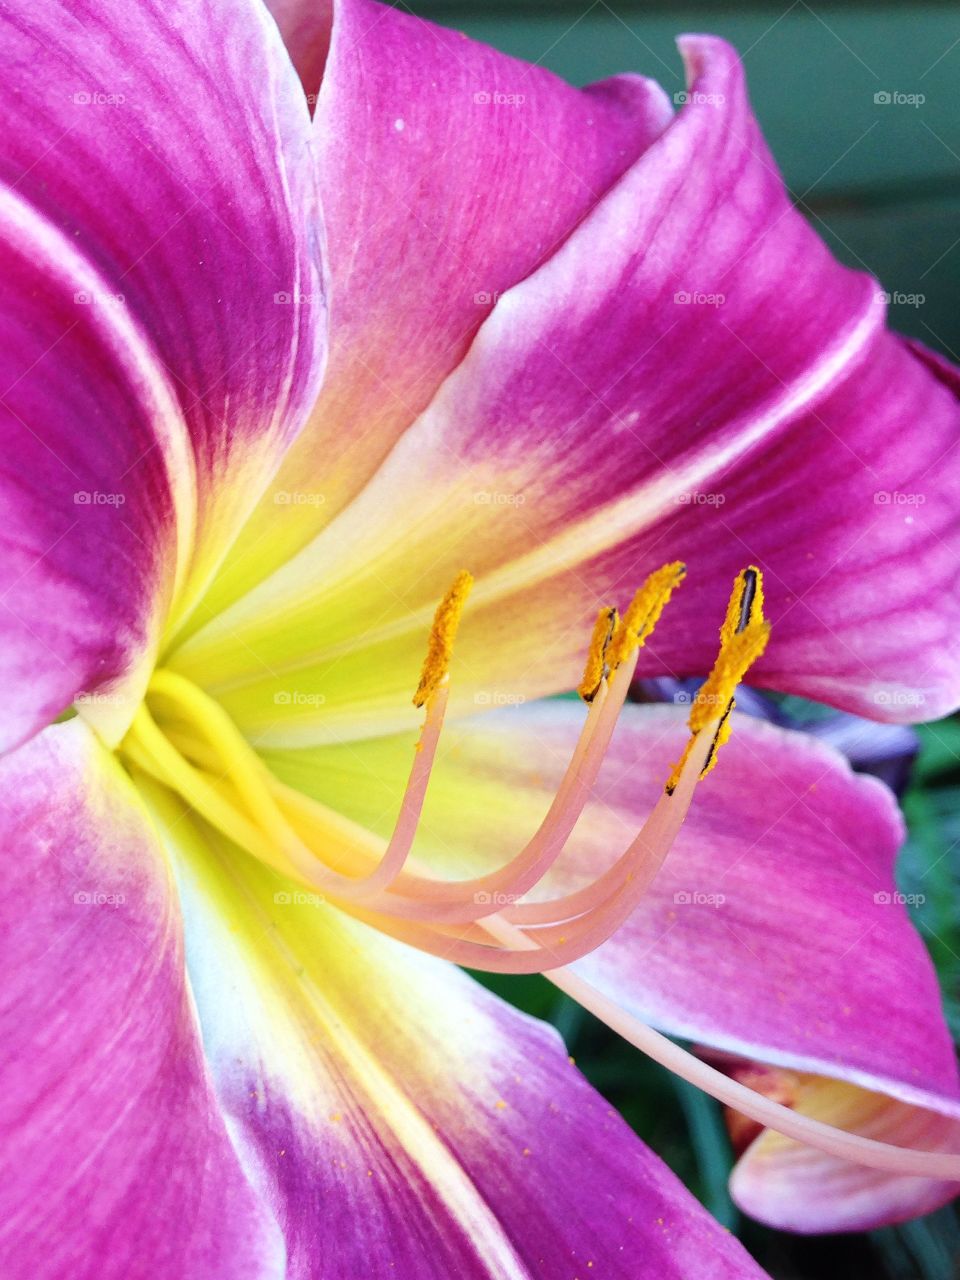 Nature's Fine Art . Love the contrasting colours of this day lily in my garden here in South Africa. So gorgeous! So vibrant! 